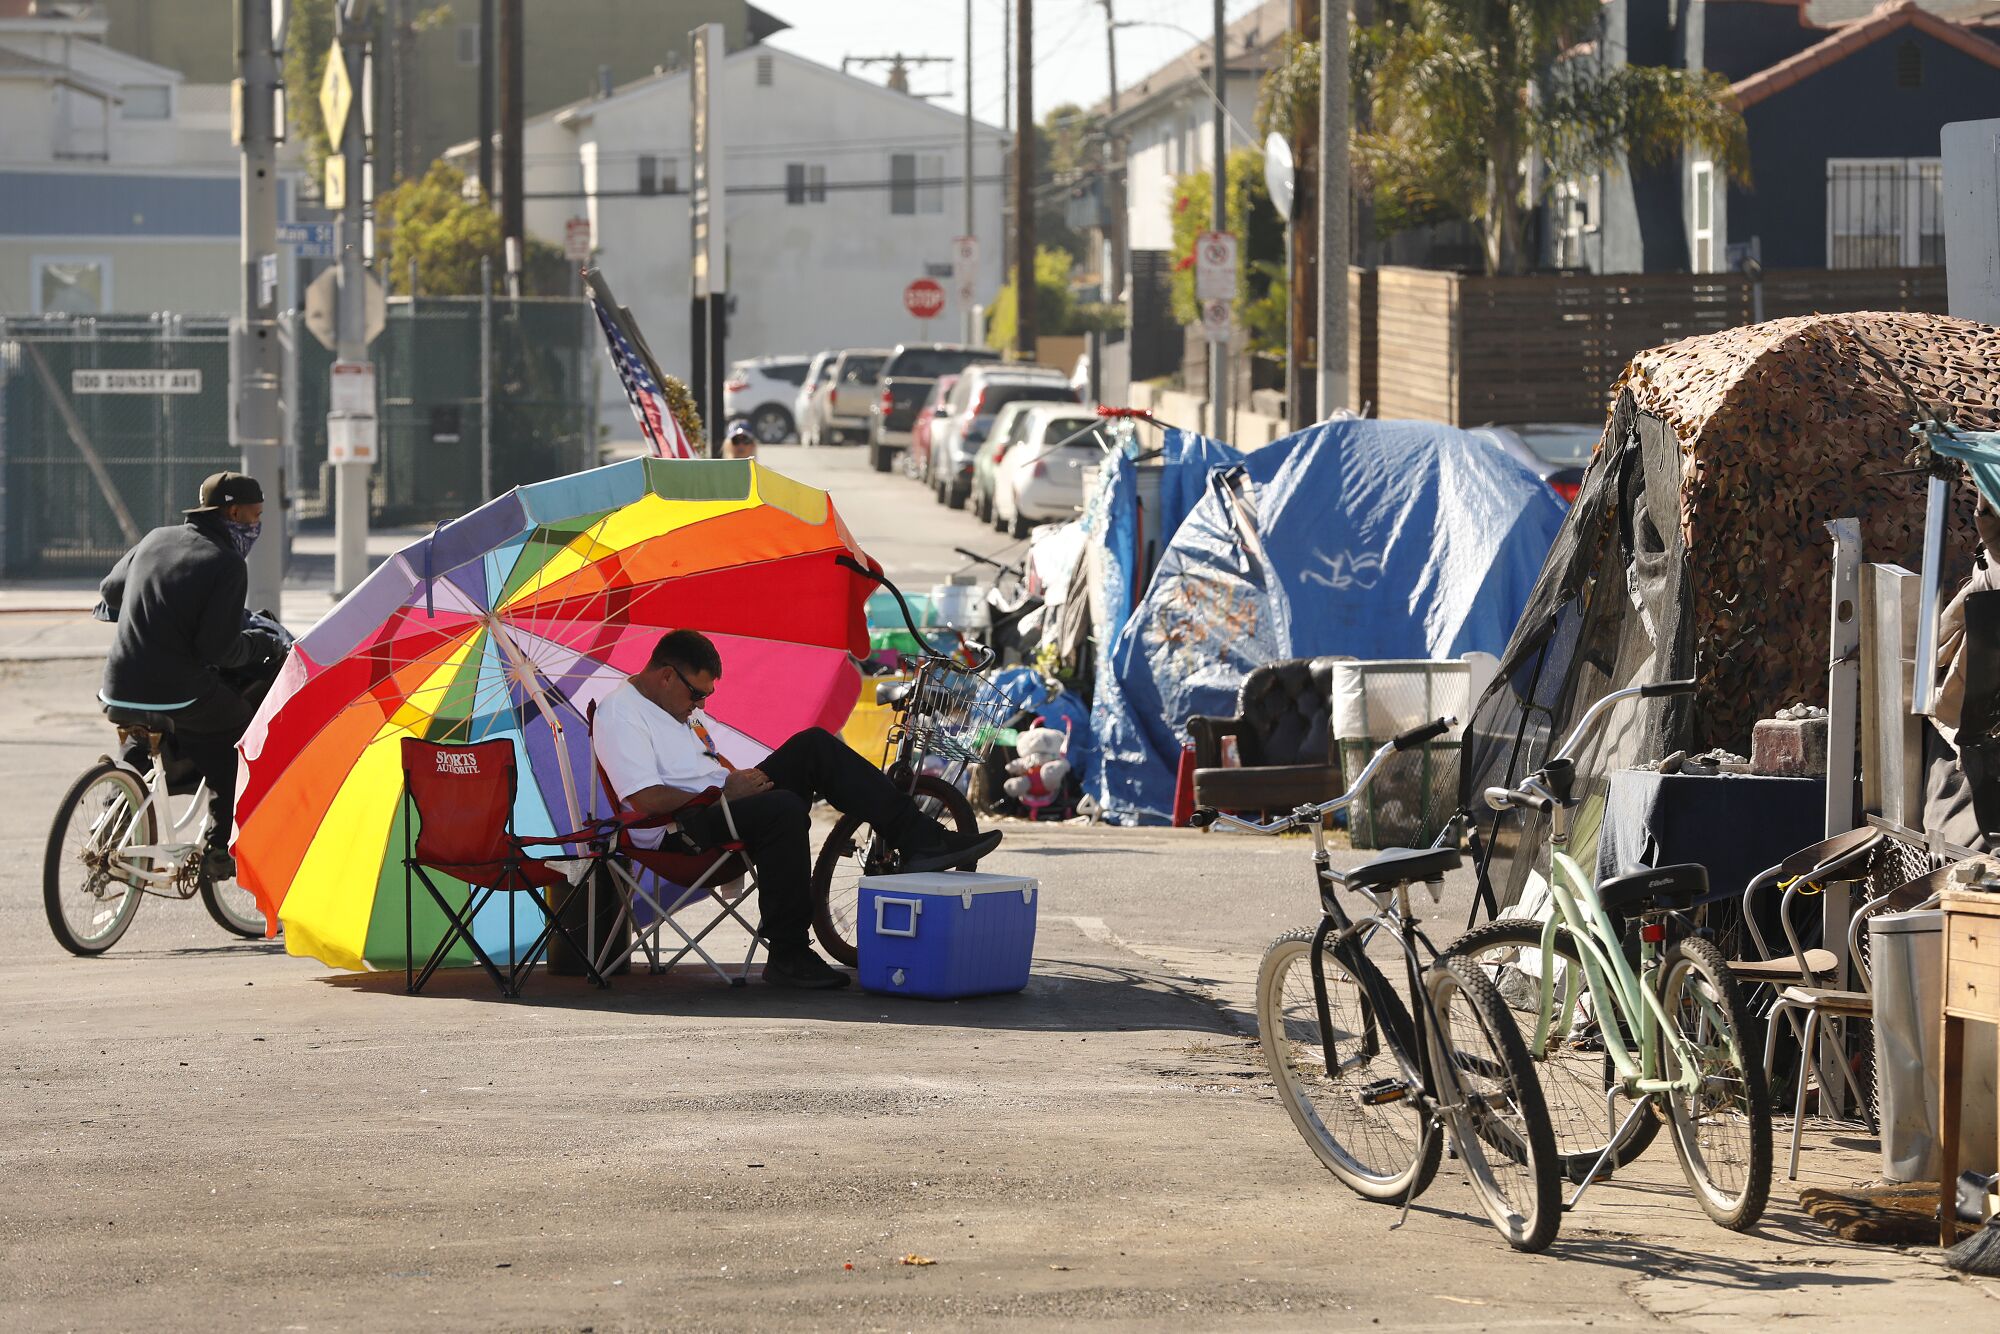 An umbrella shades Richard Thompson as he camps out with others in a Venice parking lot